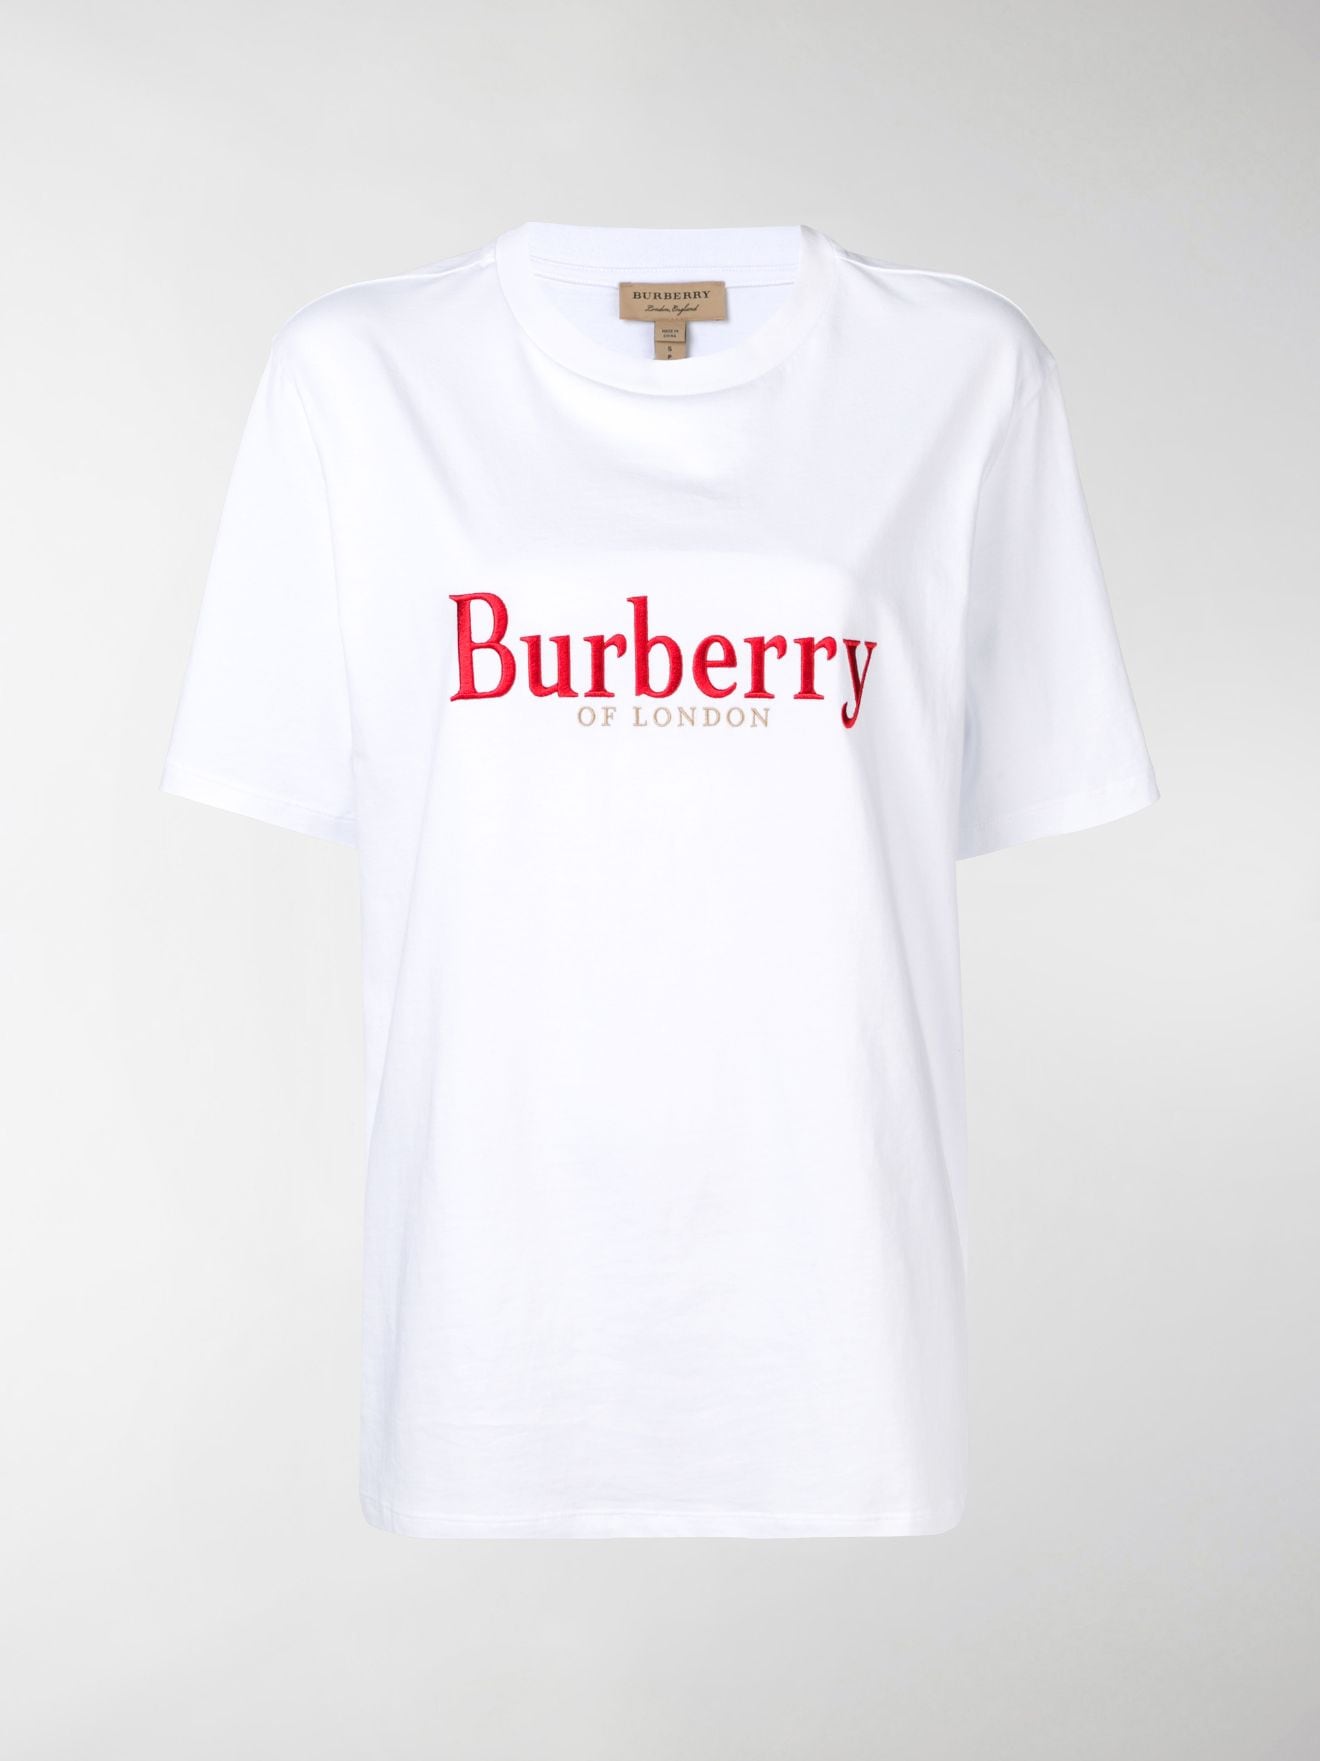 burberry embroidered archive logo jersey sweatshirt